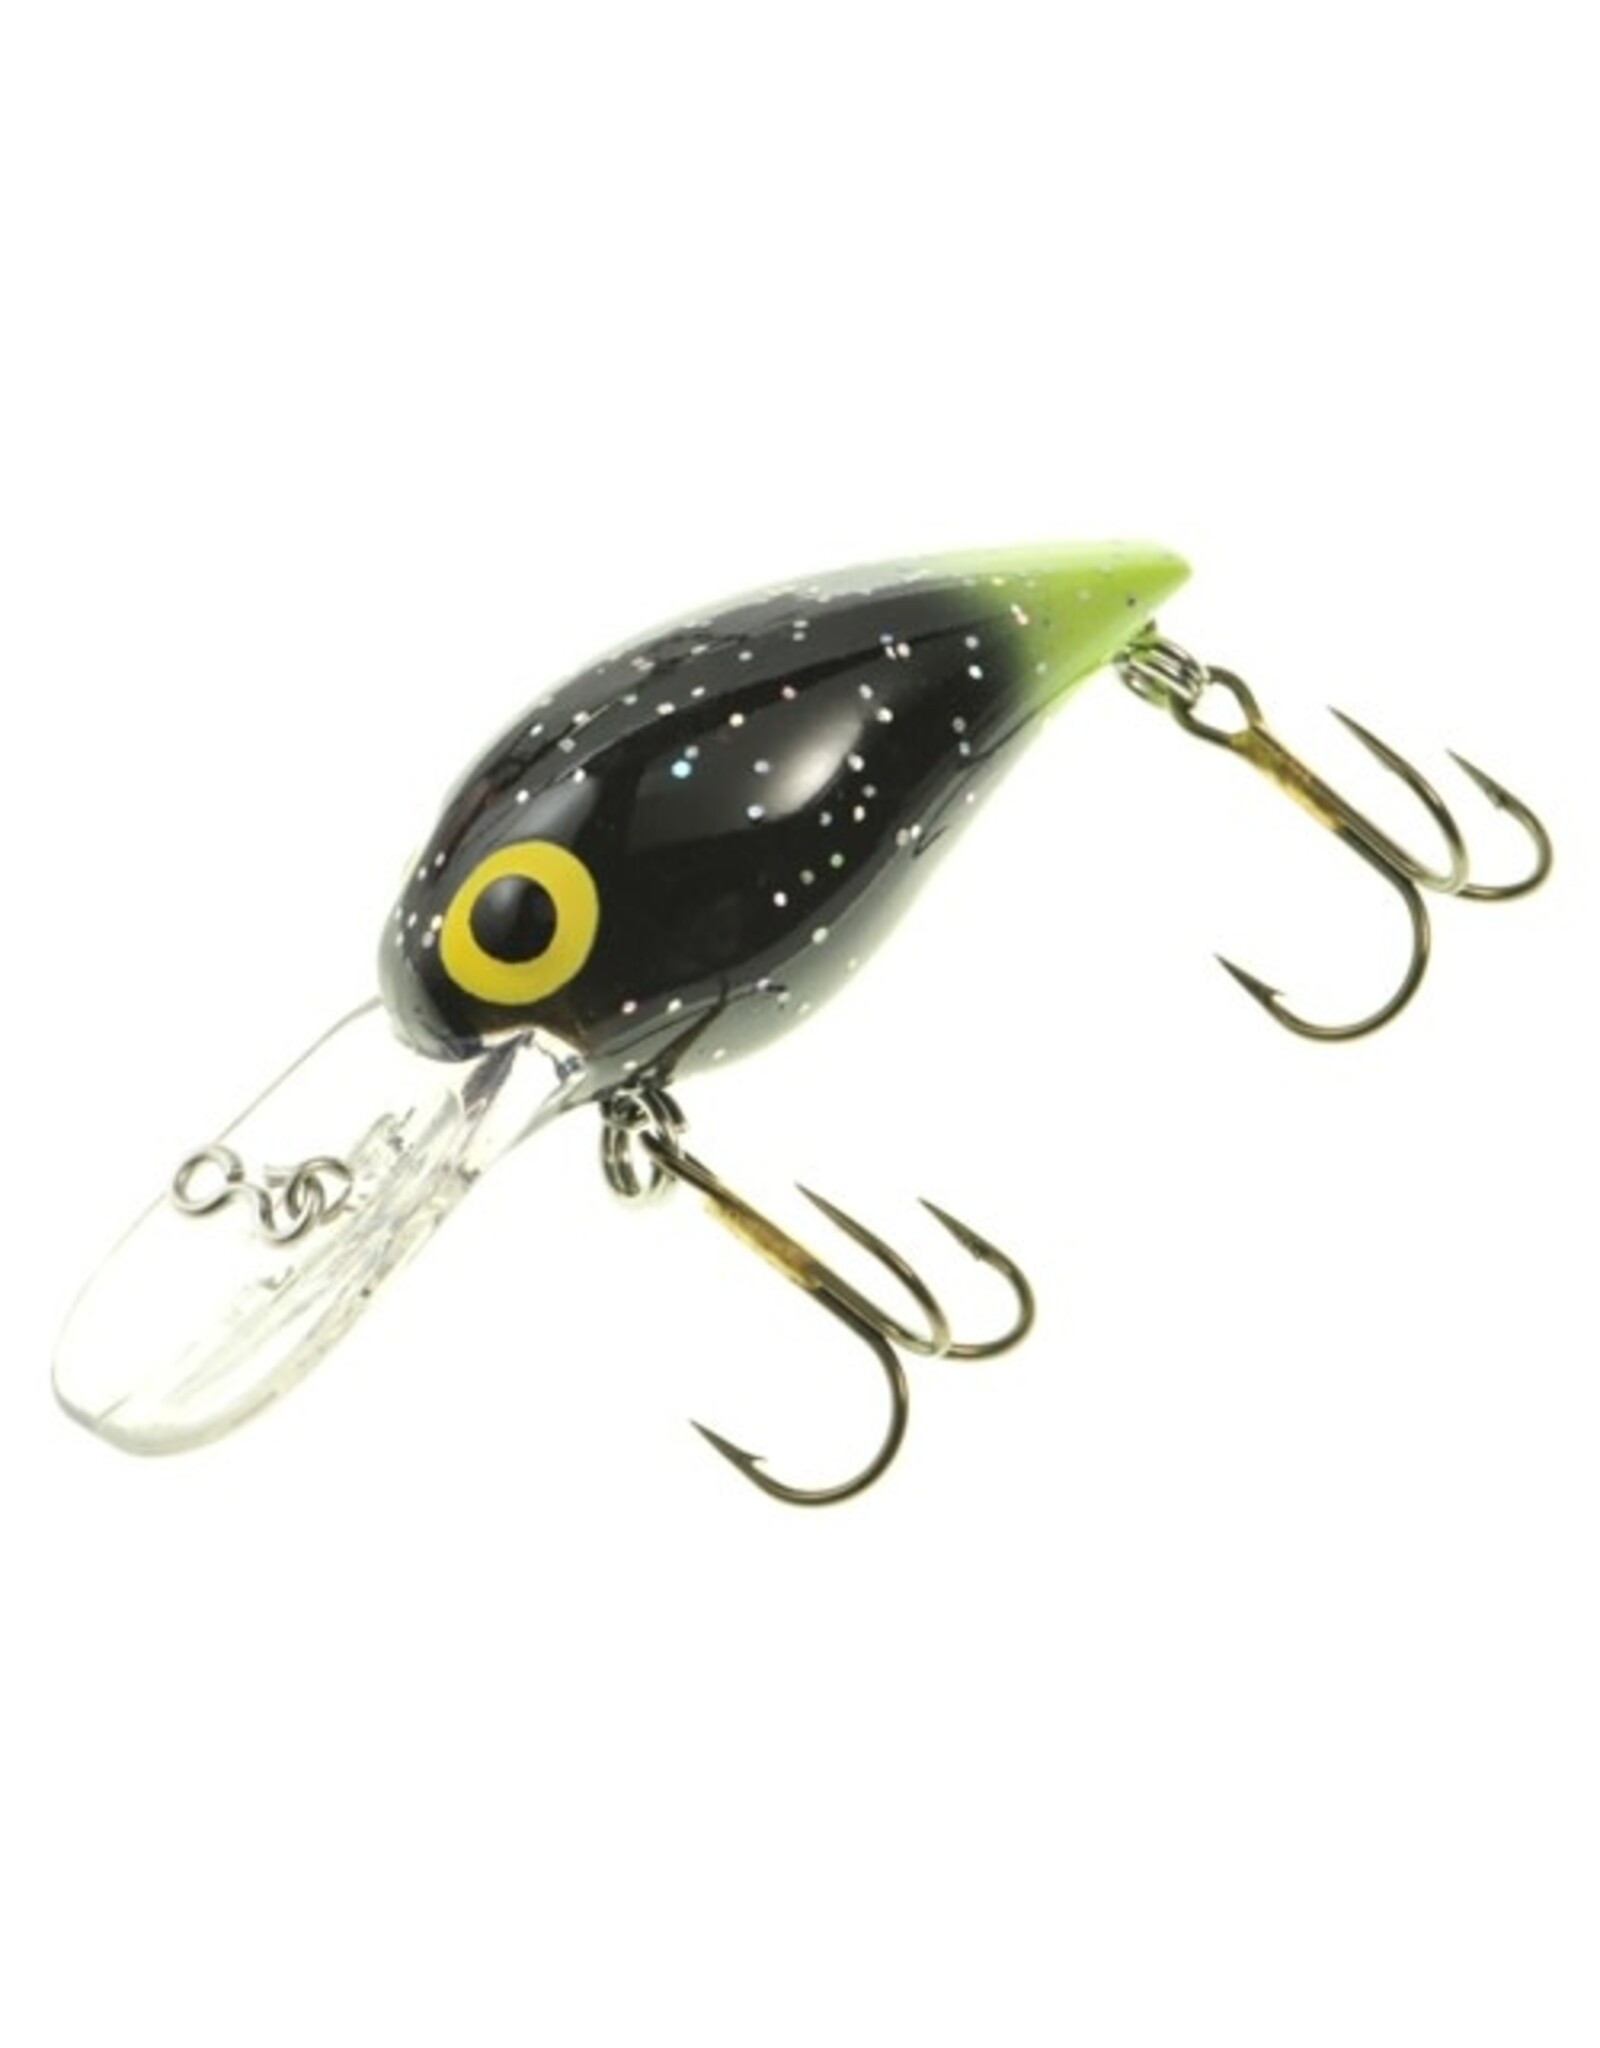 Brad's Brad's Wiggler - 3" - 3/8 Oz - Black/Silver Flakes with Chartreuse Tail